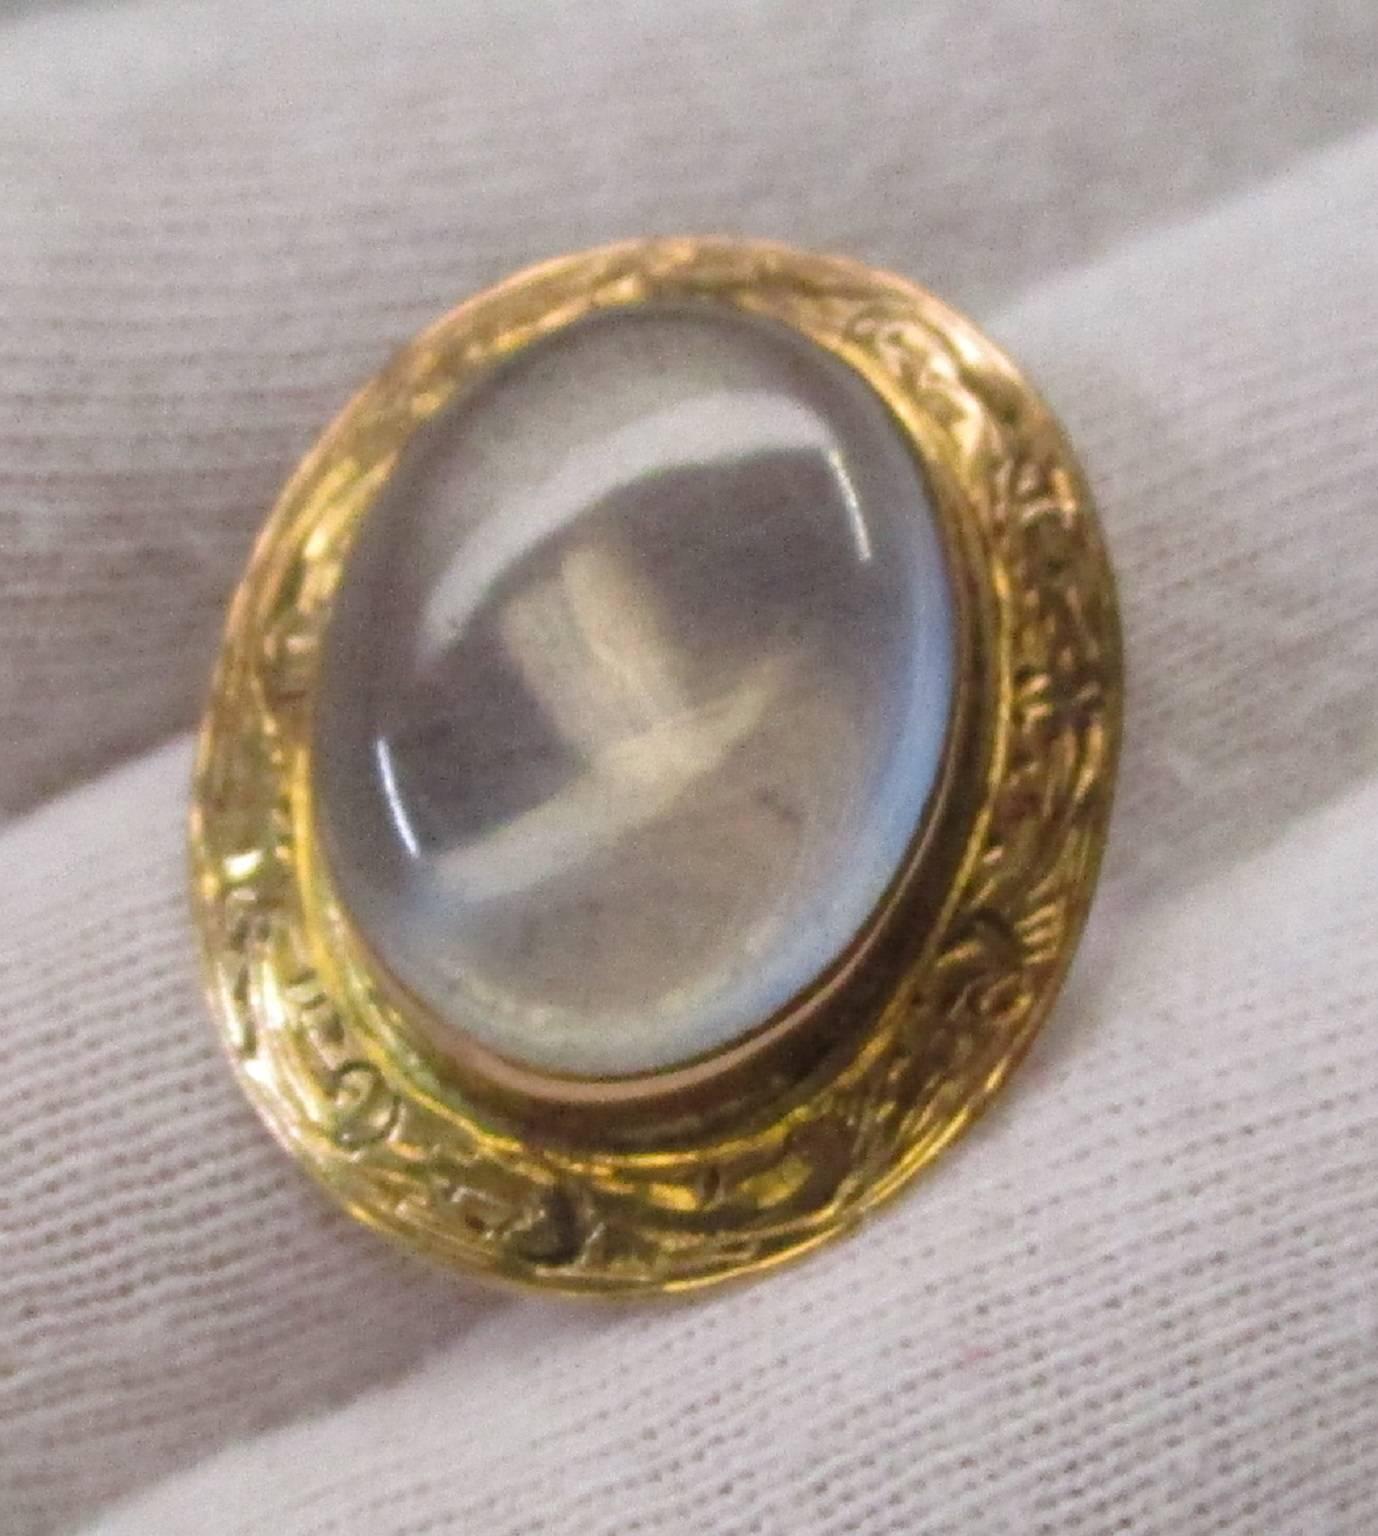 This pin from the late Victorian era is opulent and magnificent. It is 10 karat gold, which holds a luscious moonstone in a warm embrace. The golden scroll work is hand-engraved, which is precise and sharp and has aged very well. The exquisite